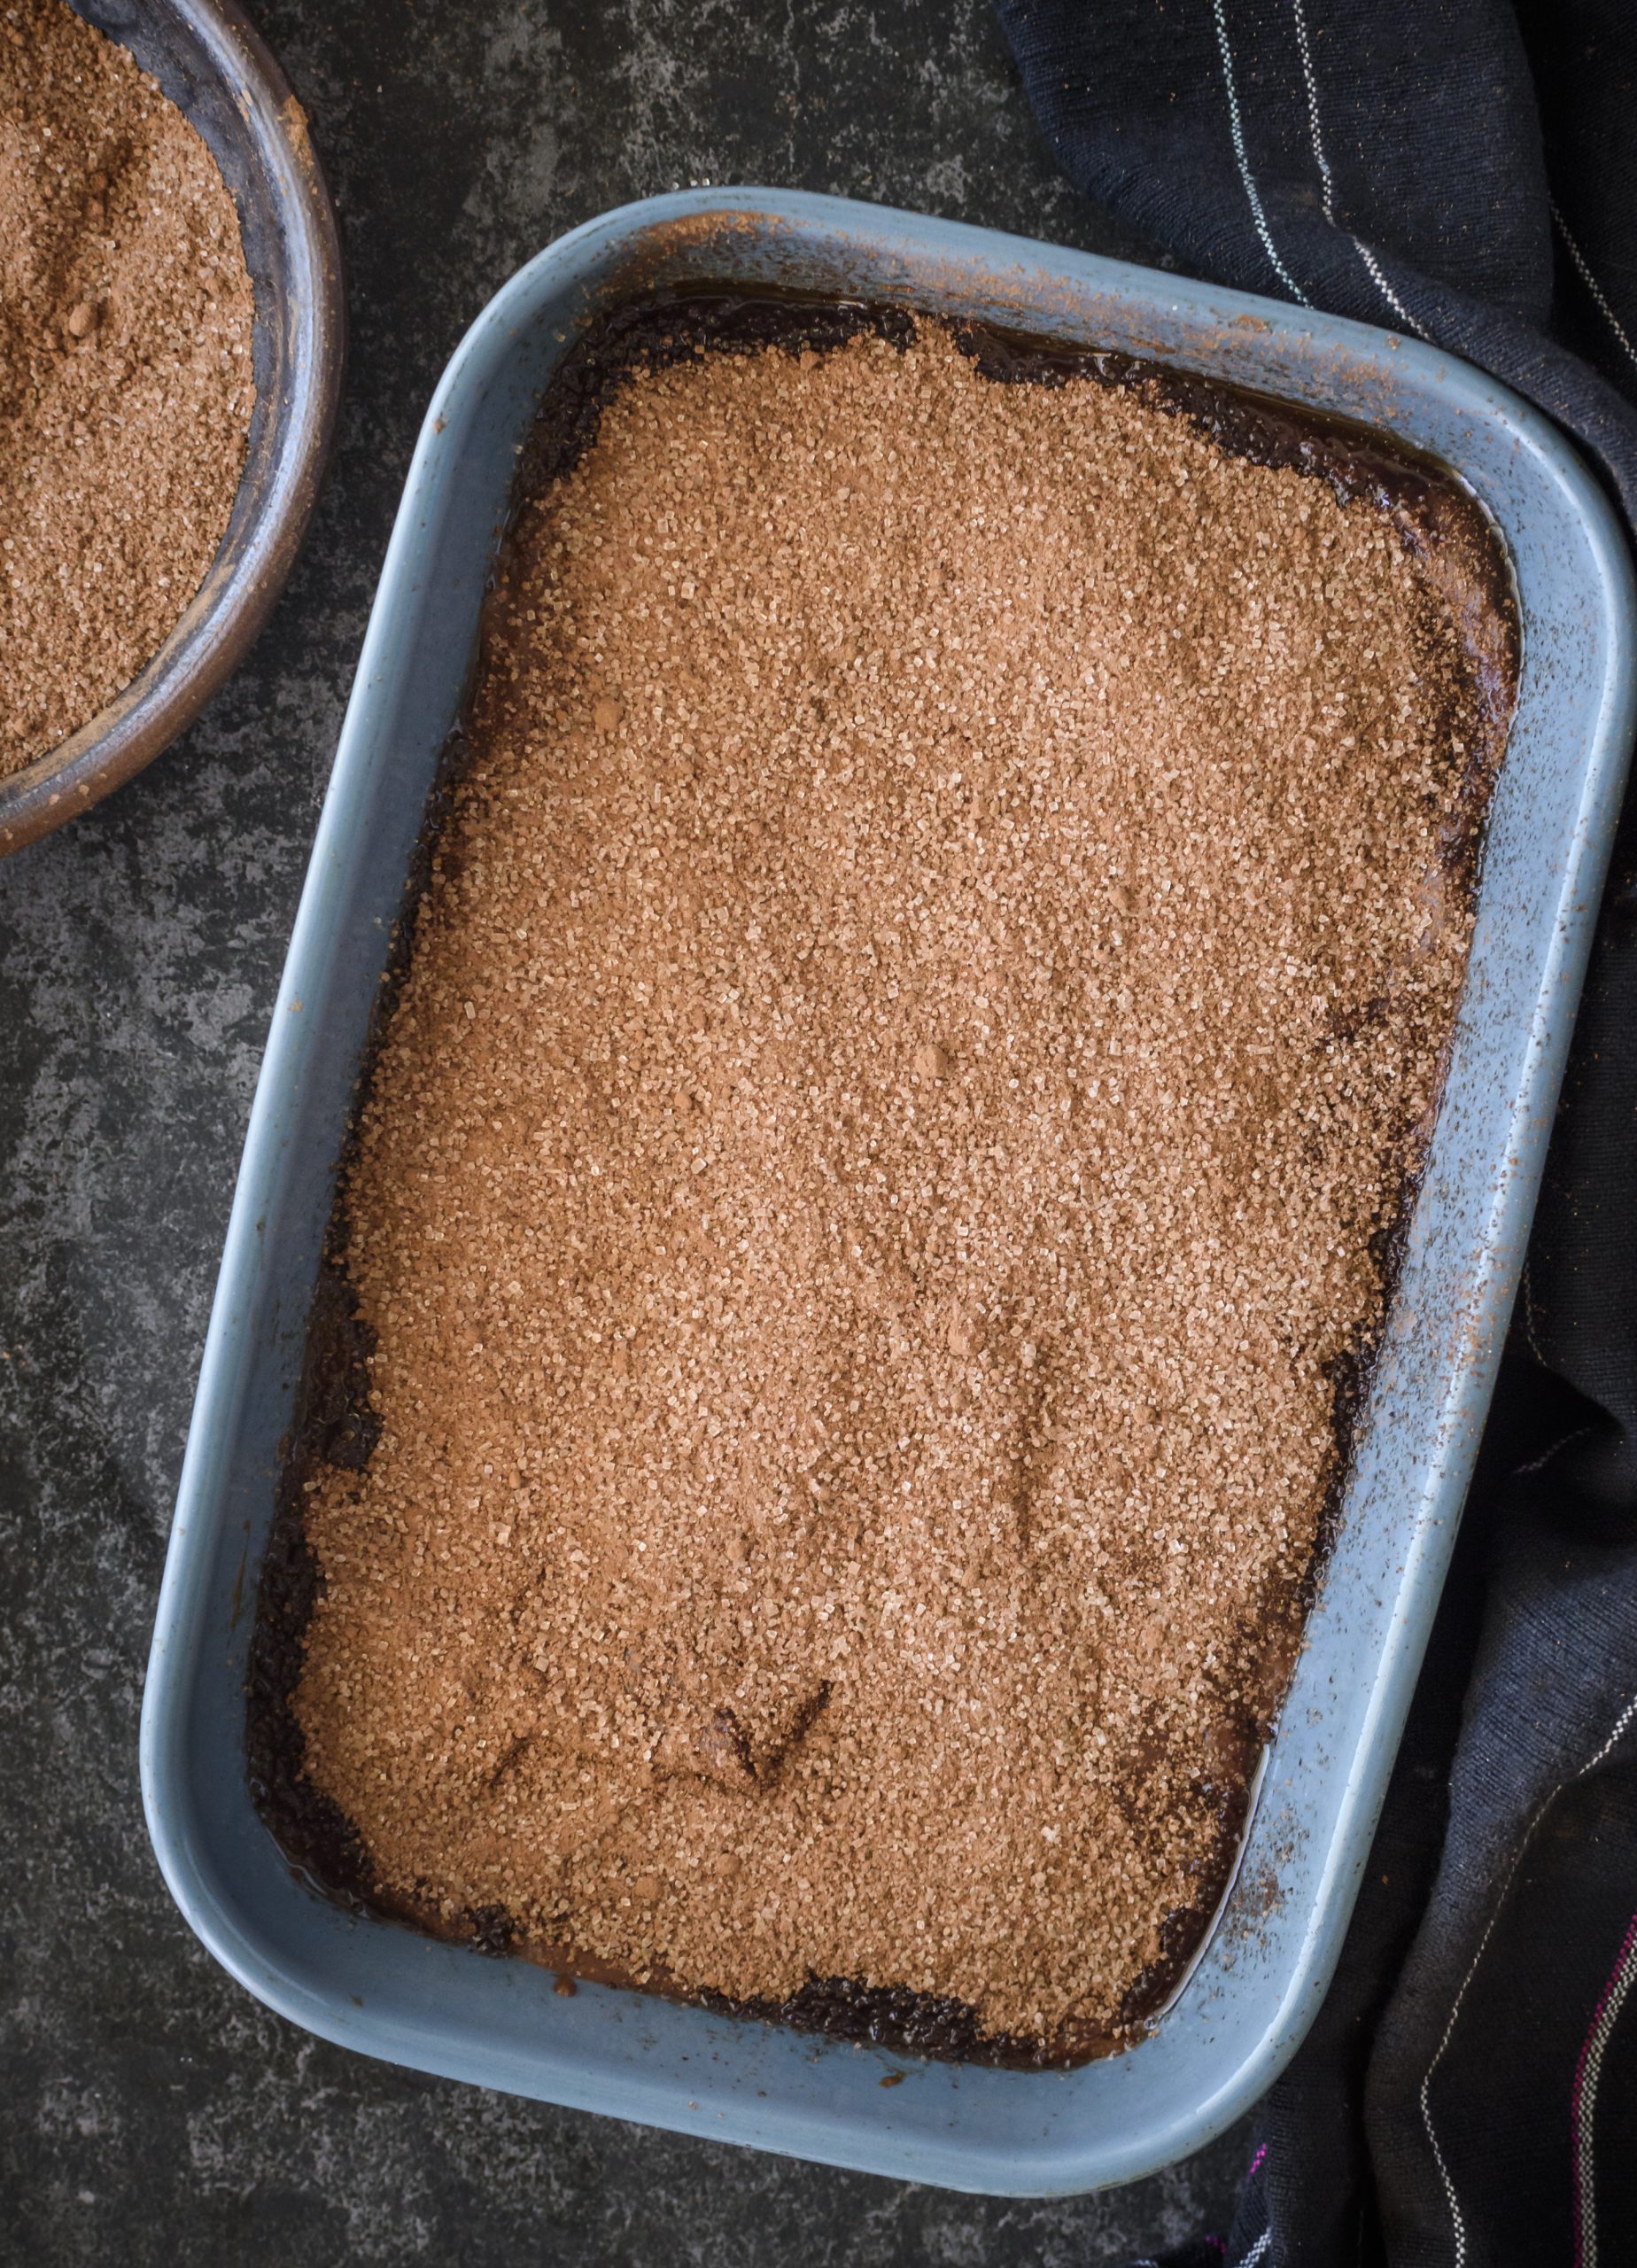 In a bowl, combine the remaining ¼ cup of cocoa powder with the remaining ½ cup of sugar, and sprinkle this mixture over the batter in the baking dish. 